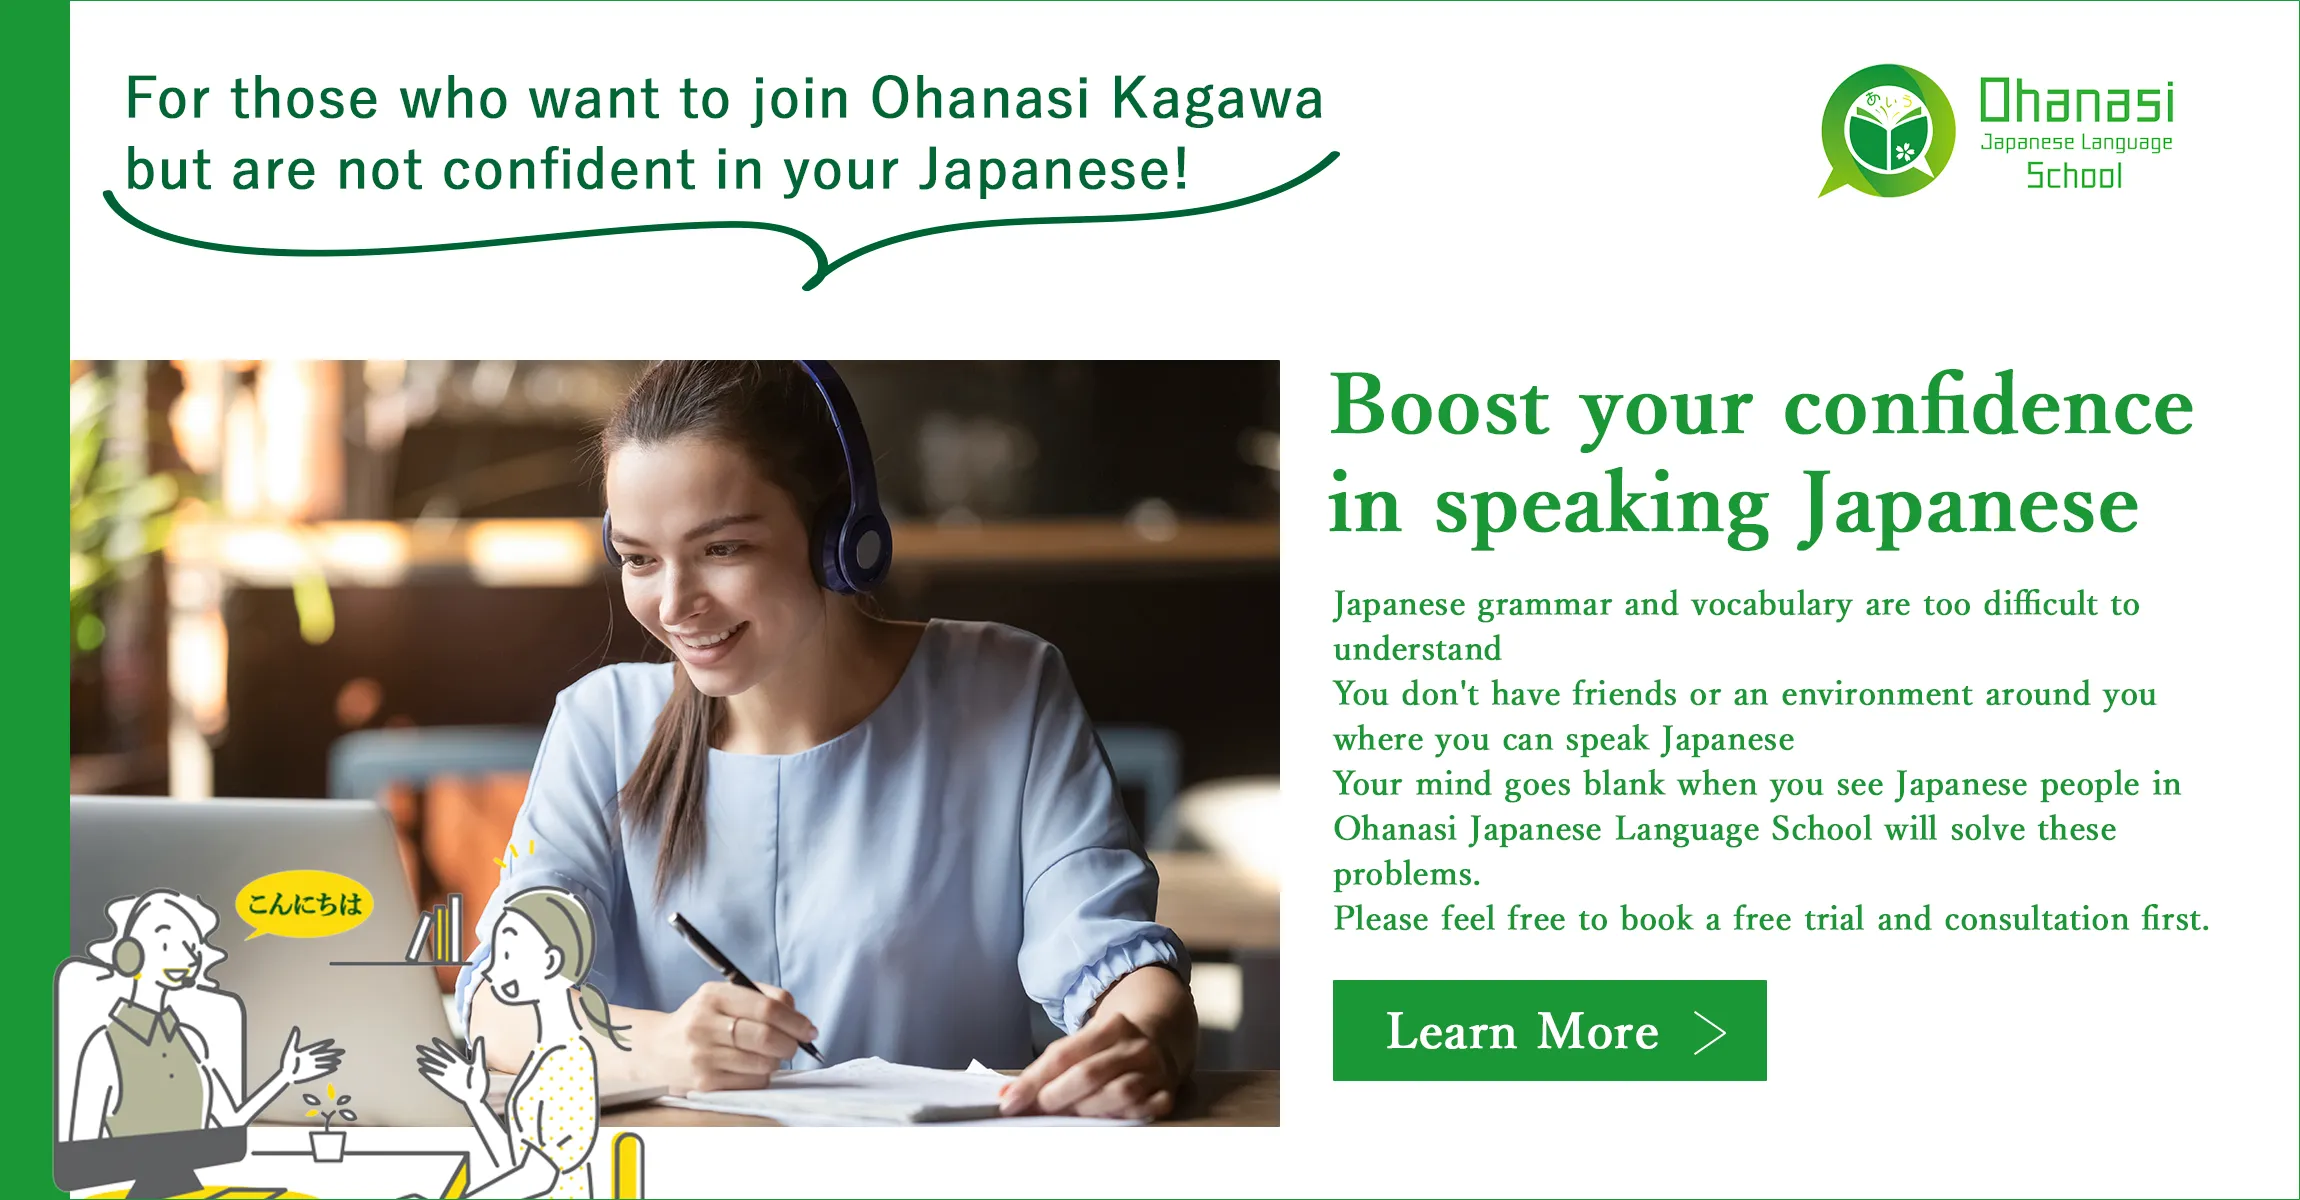 For those who want to join Ohanasi Kagawa but are not confident in your Japanese! Boost your confidence in speaking Japanese Japanese grammar and vocabulary are too difficult to understand You don't have friends or an environment around you where you can speak Japanese Your mind goes blank when you see Japanese people in Ohanasi Japanese Language School will solve these problems. Please feel free to bool a free trial and consultation first. Learn More >